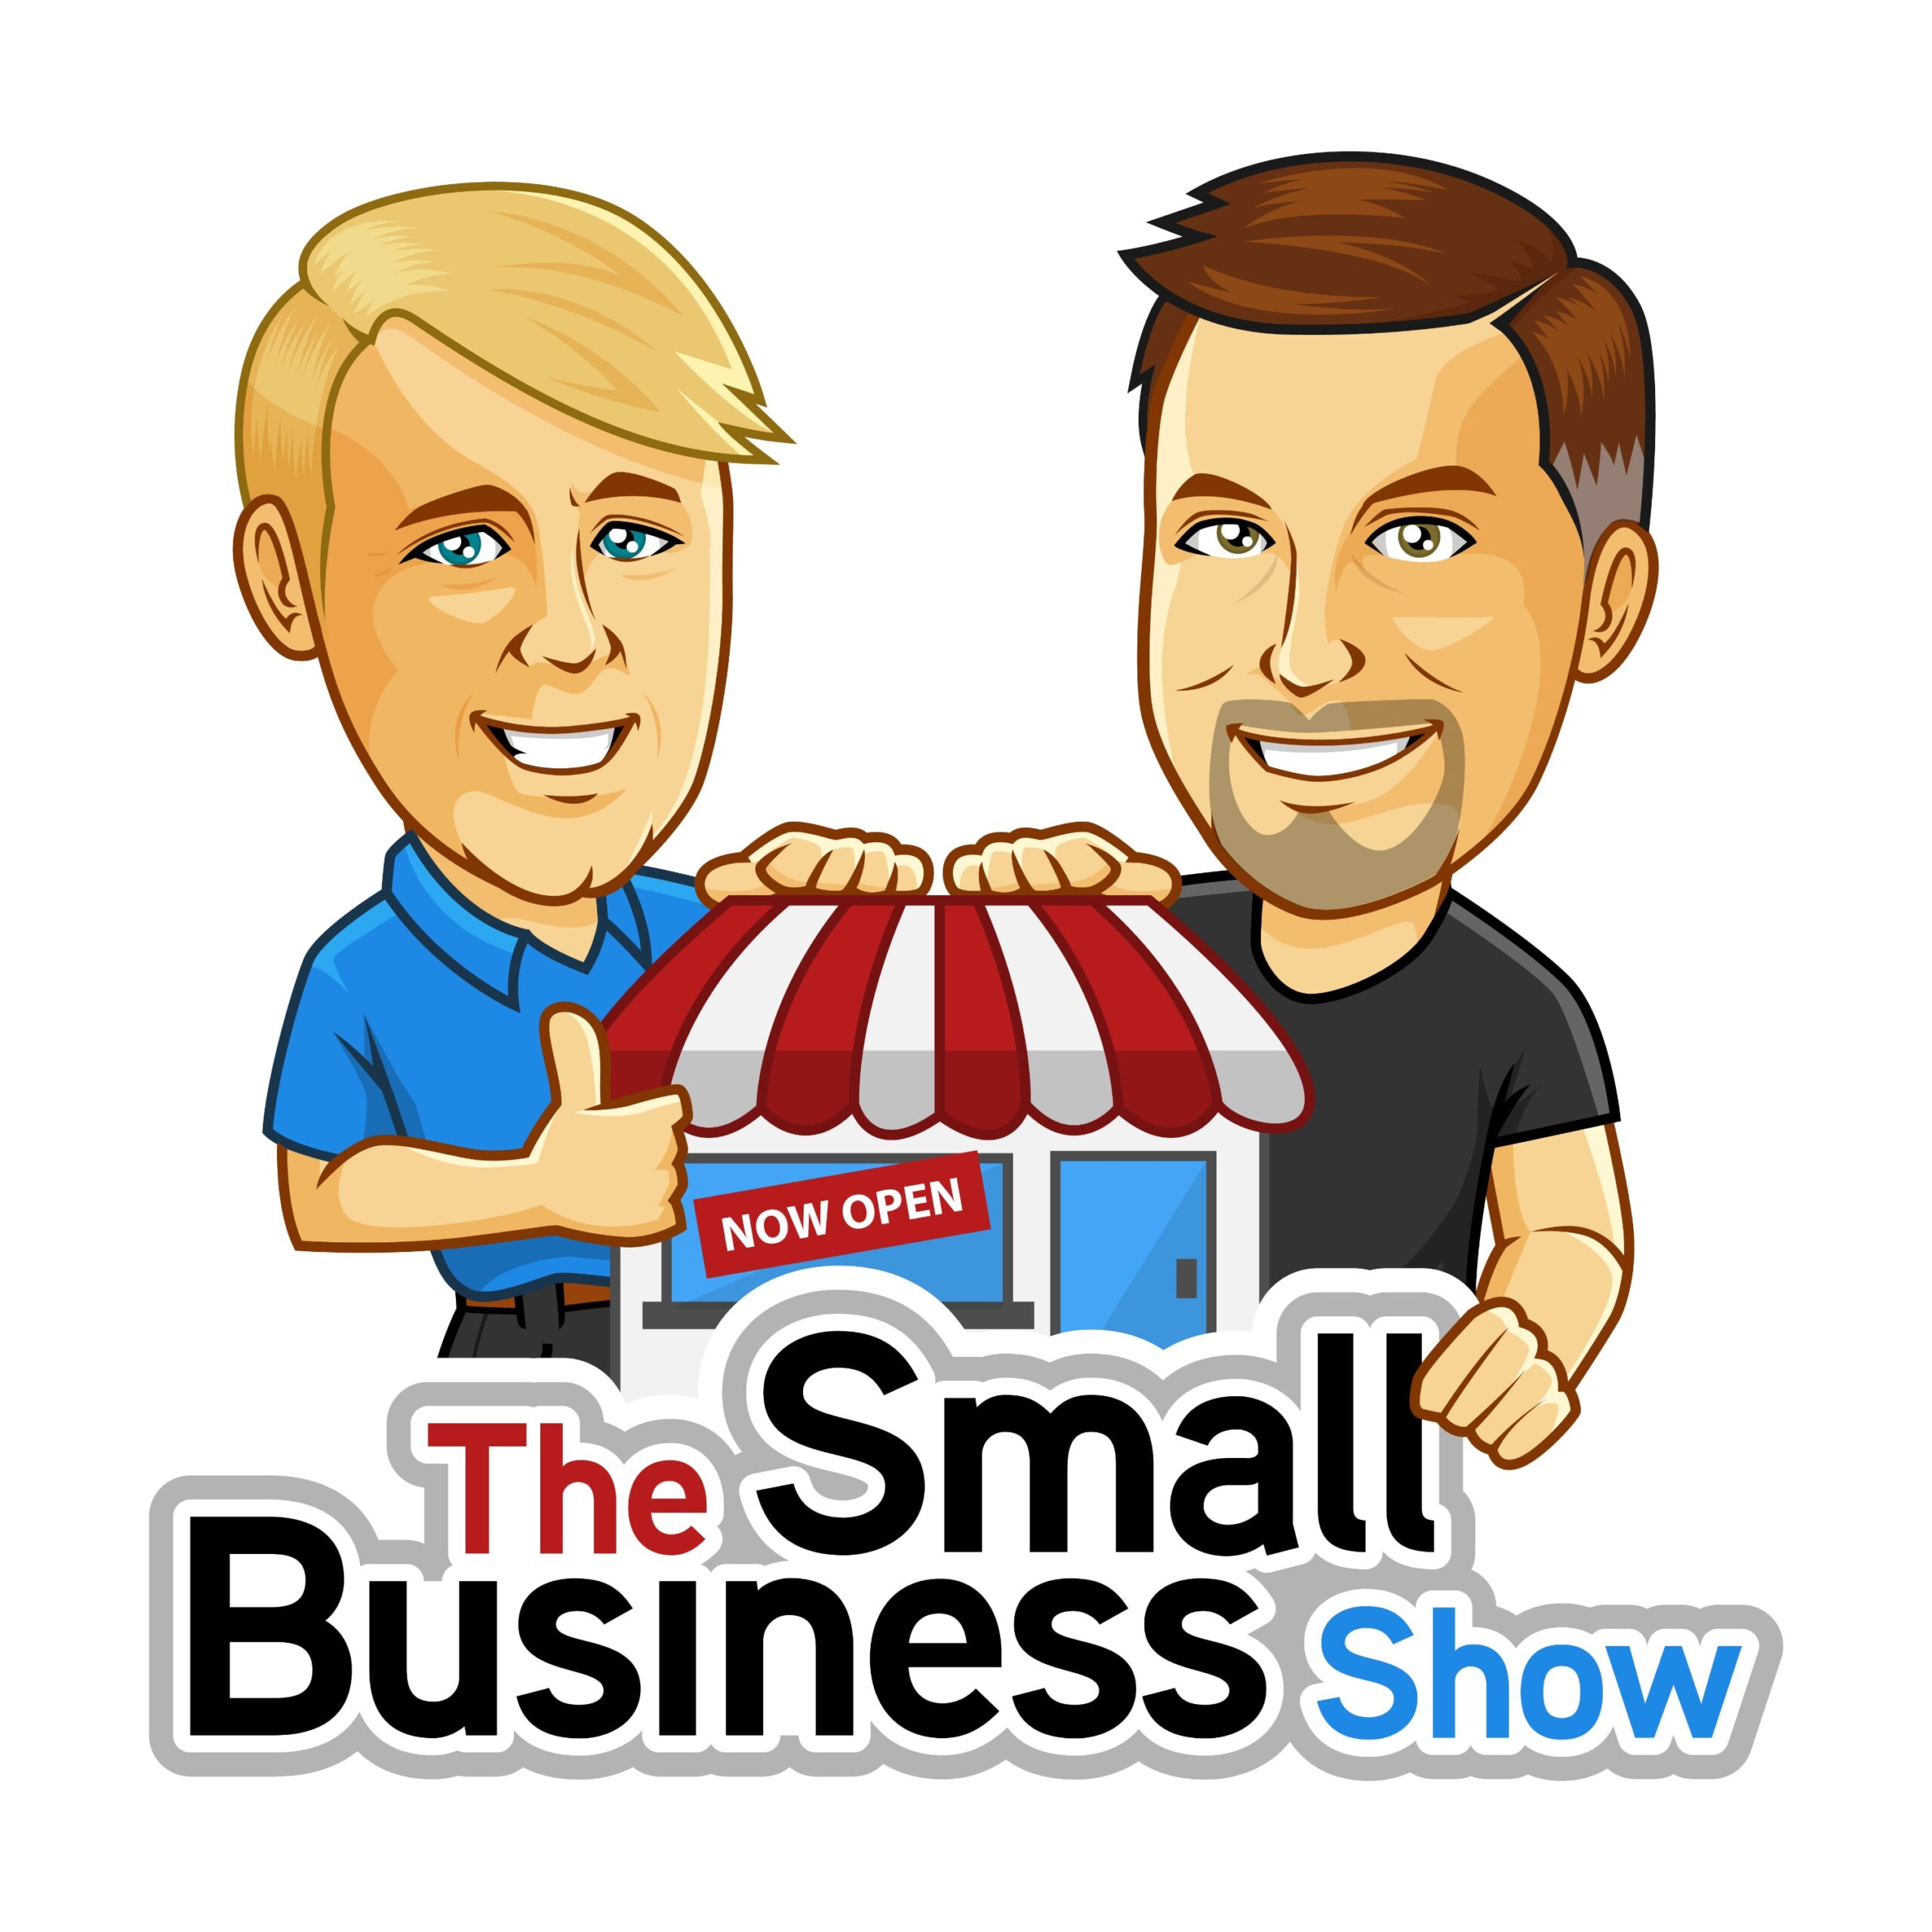 The Small Business Show